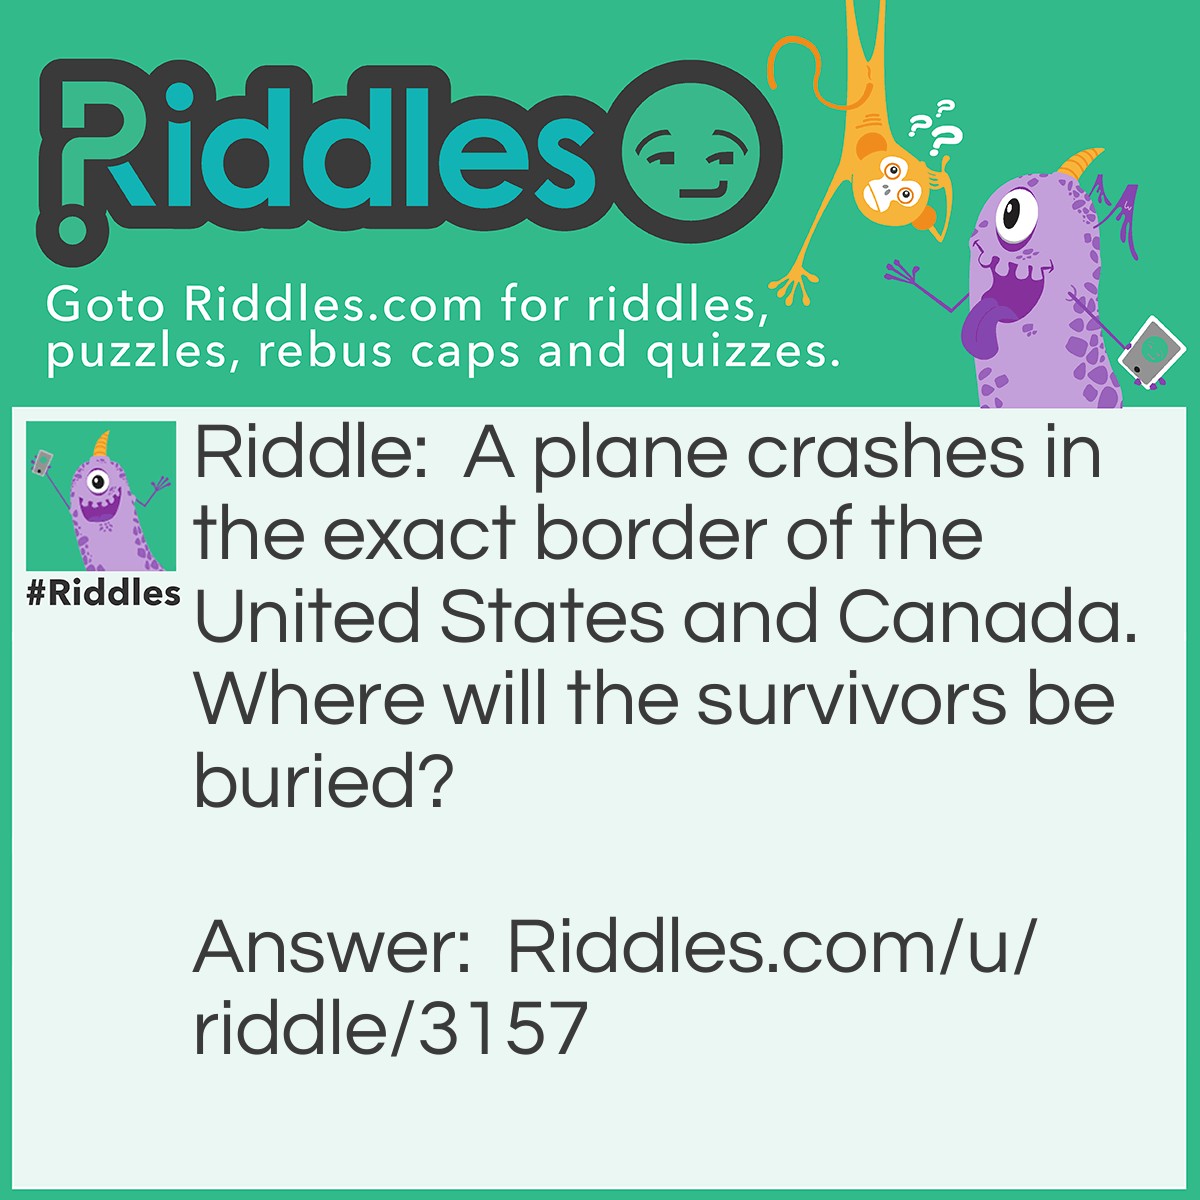 Riddle: A plane crashes in the exact border of the United States and Canada. Where will the survivors be buried? Answer: They're survivors. They wouldn't be buried because they didn't die.